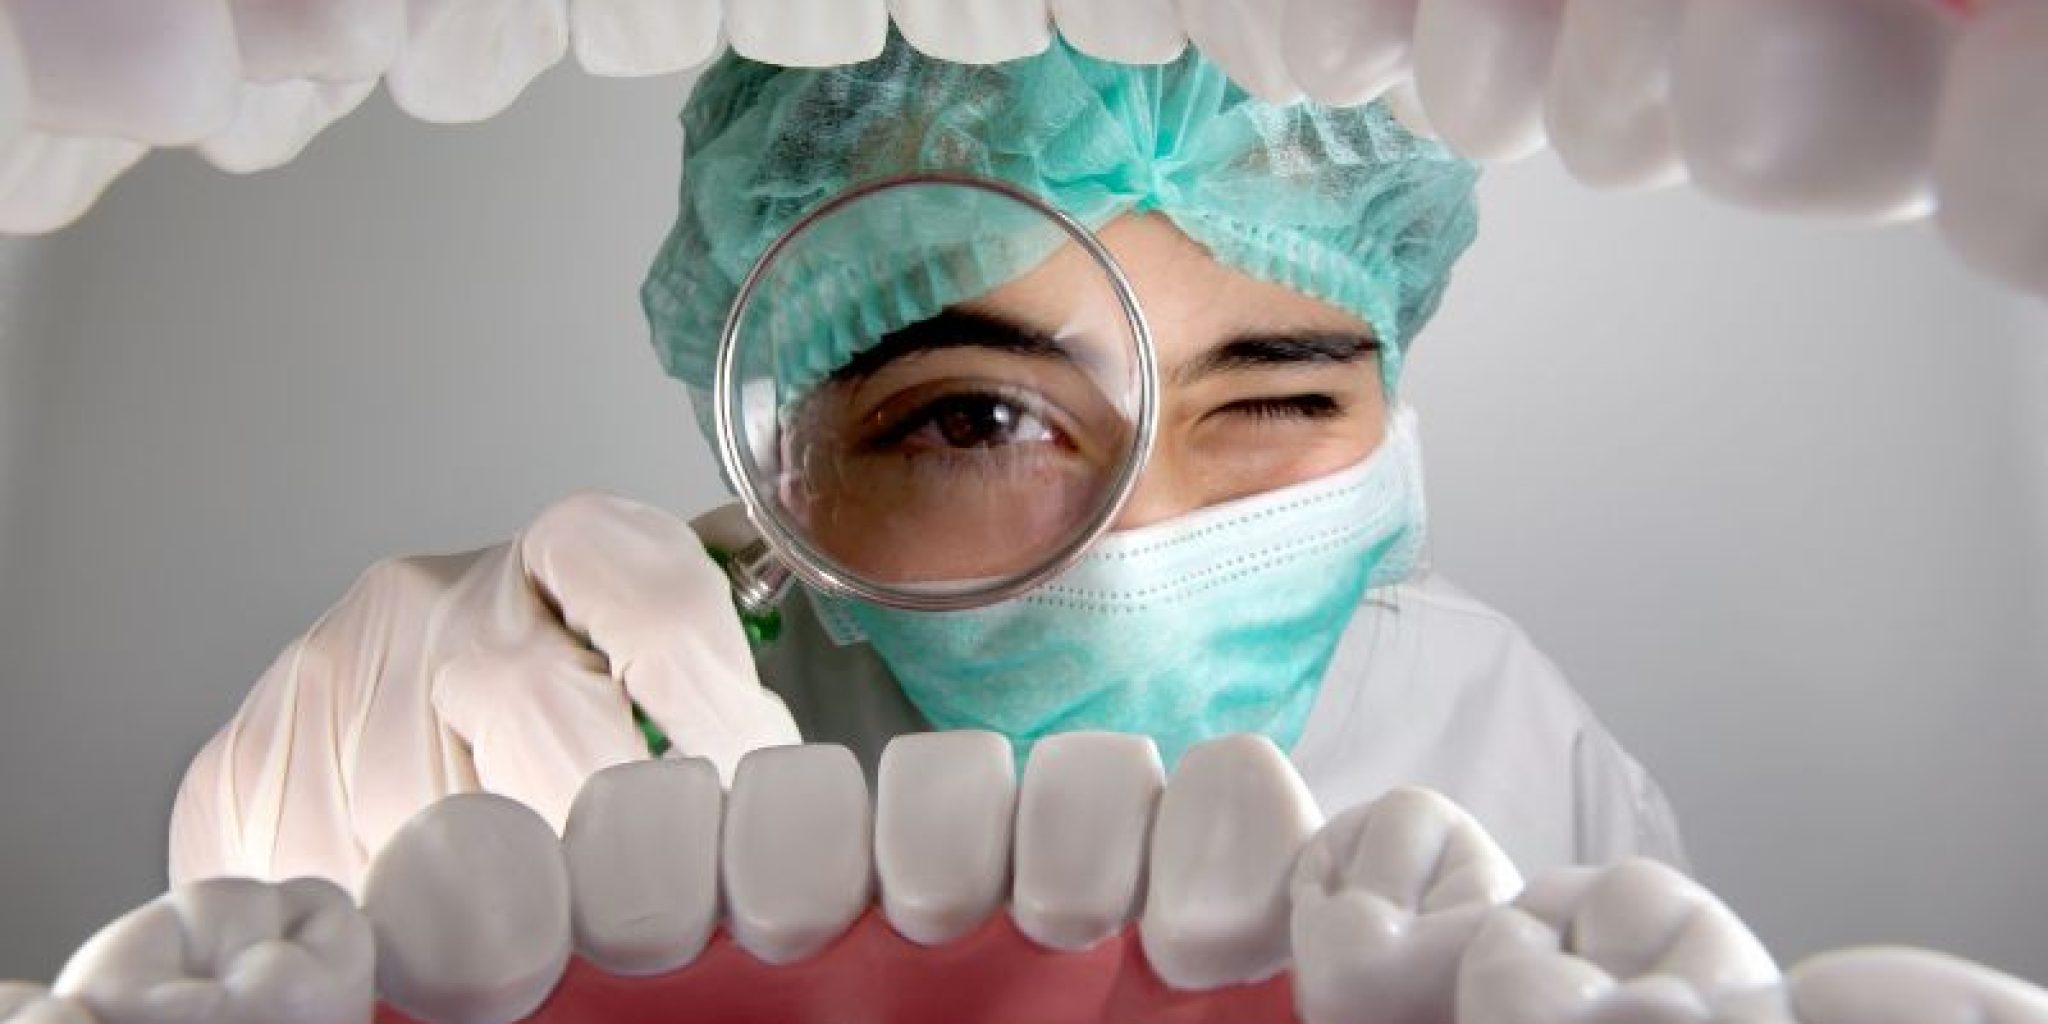 dentist observing patients mouth for repairing oral mucosa with peptides